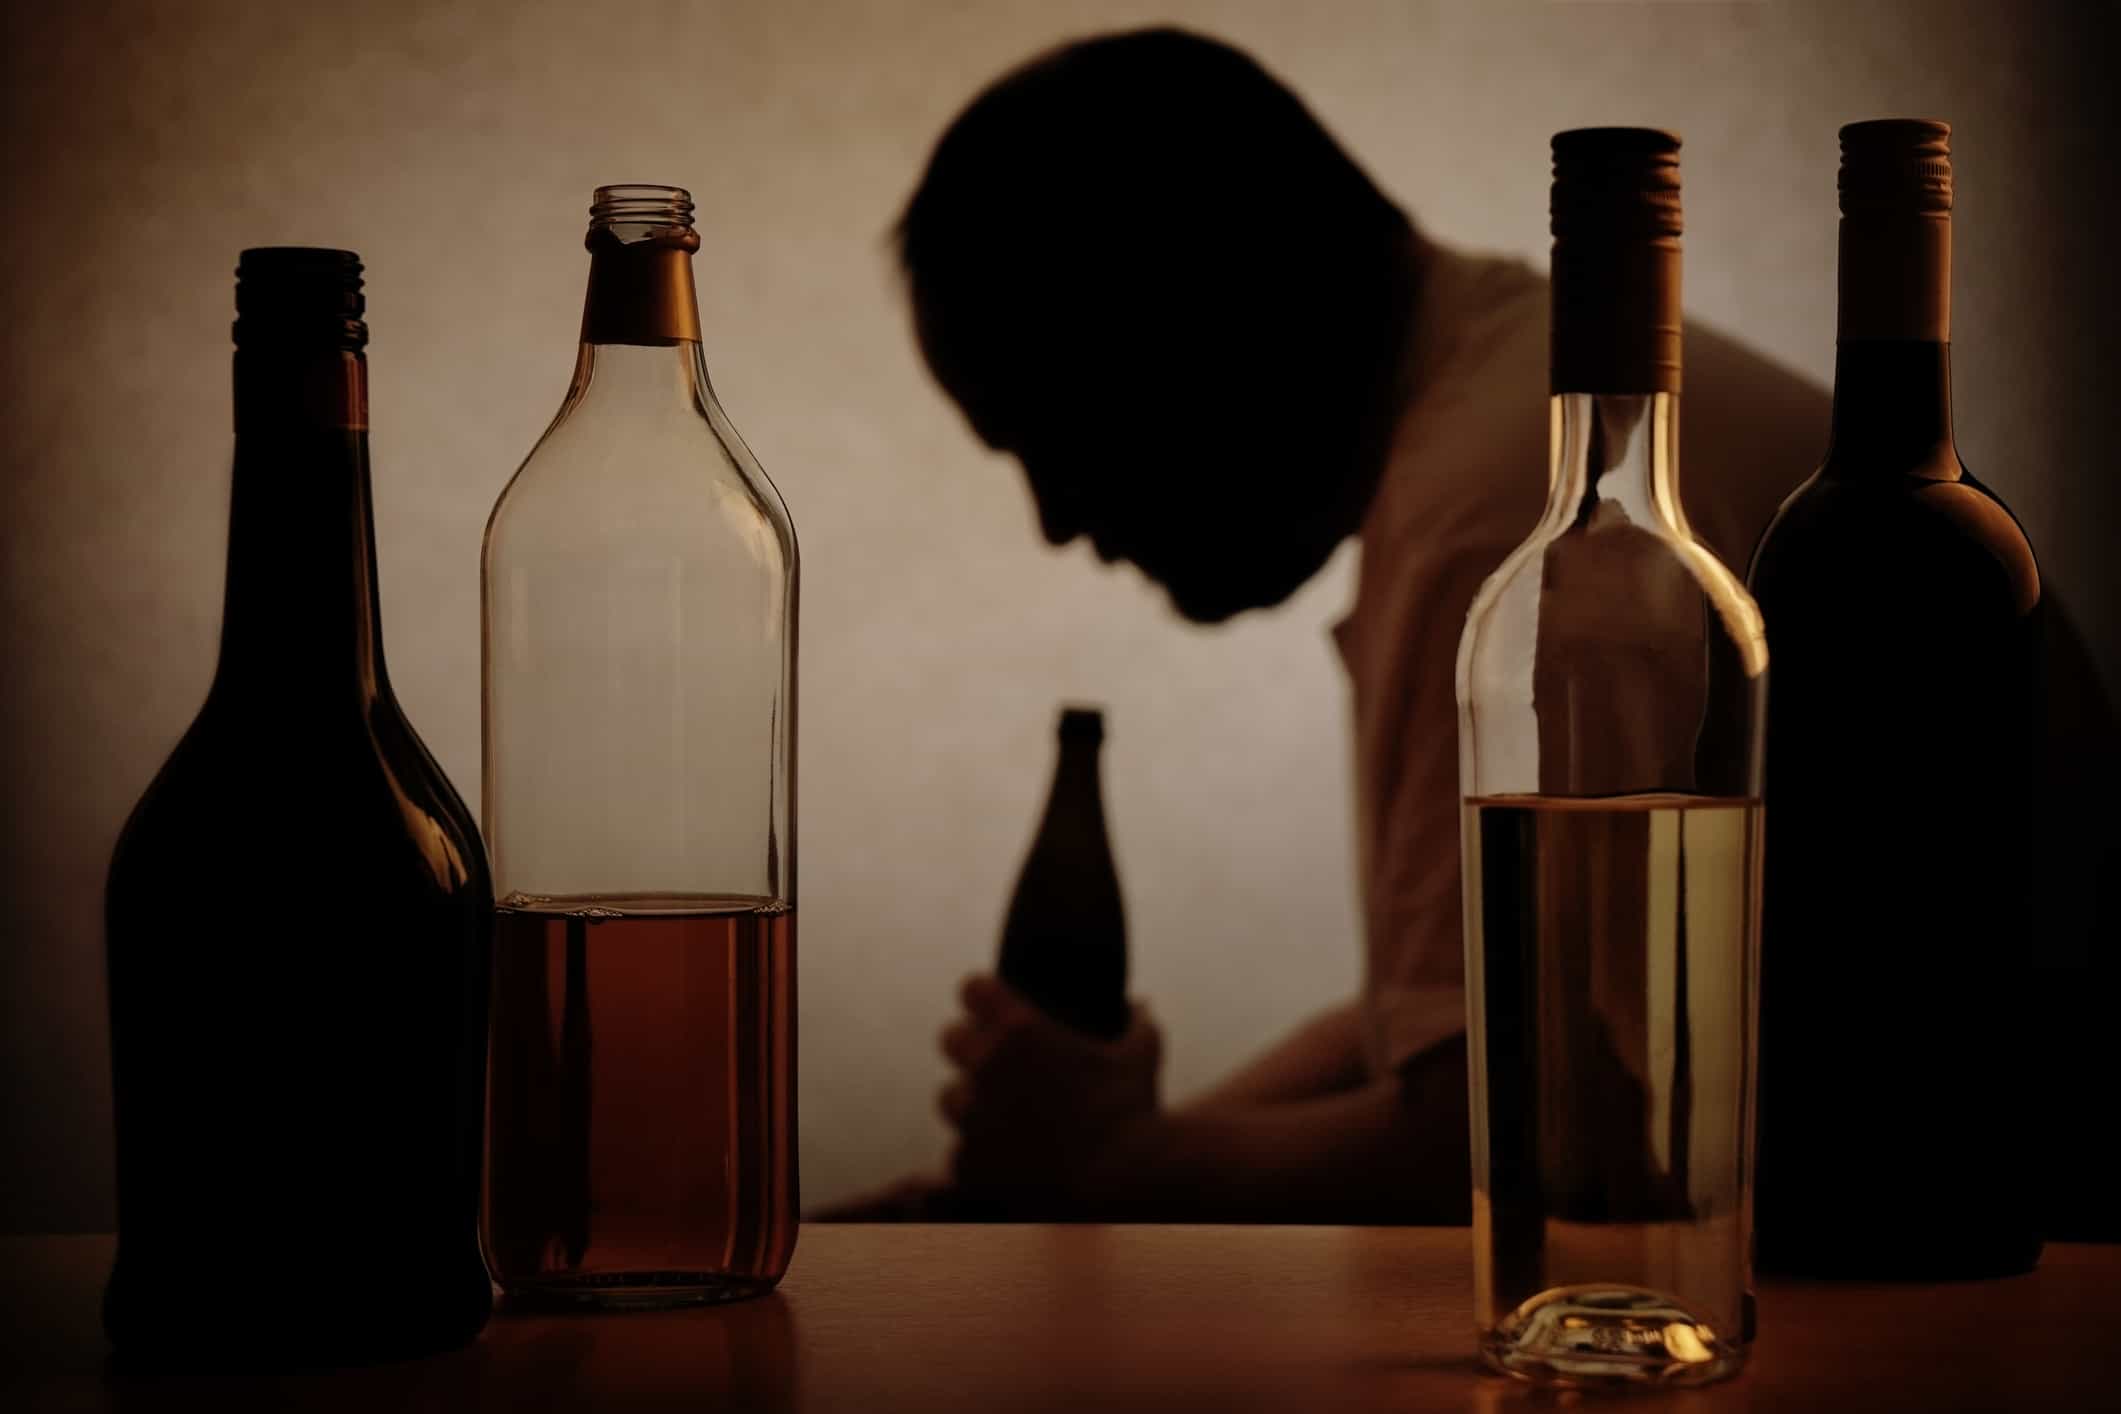  man with an alcohol abuse problem  